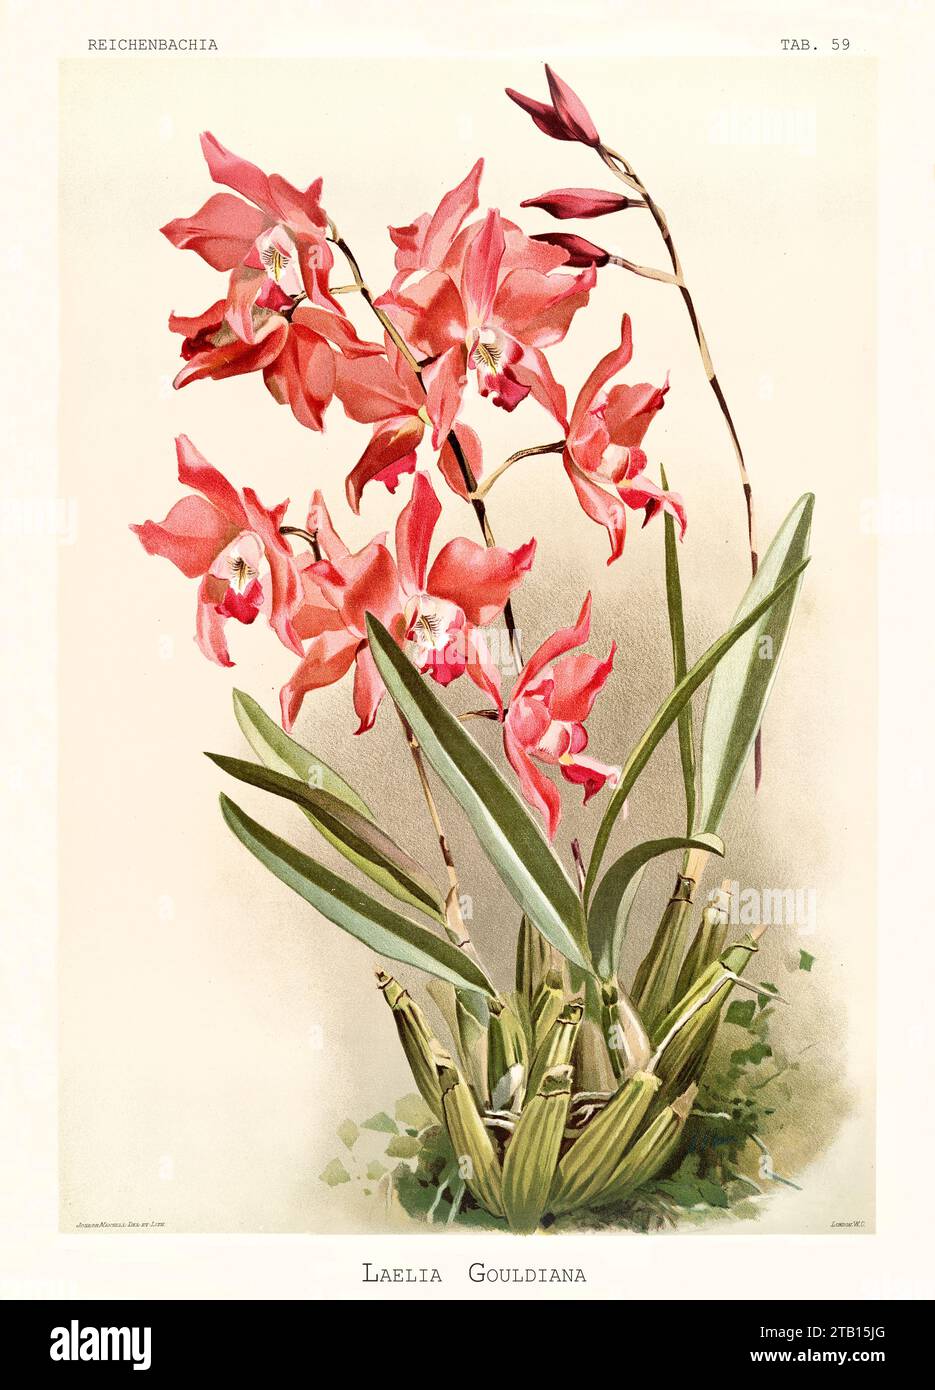 Old illustration of  Gould's Laelia (Laelia gouldiana). Reichenbachia, by F. Sander. St. Albans, UK, 1888 - 1894 Stock Photo